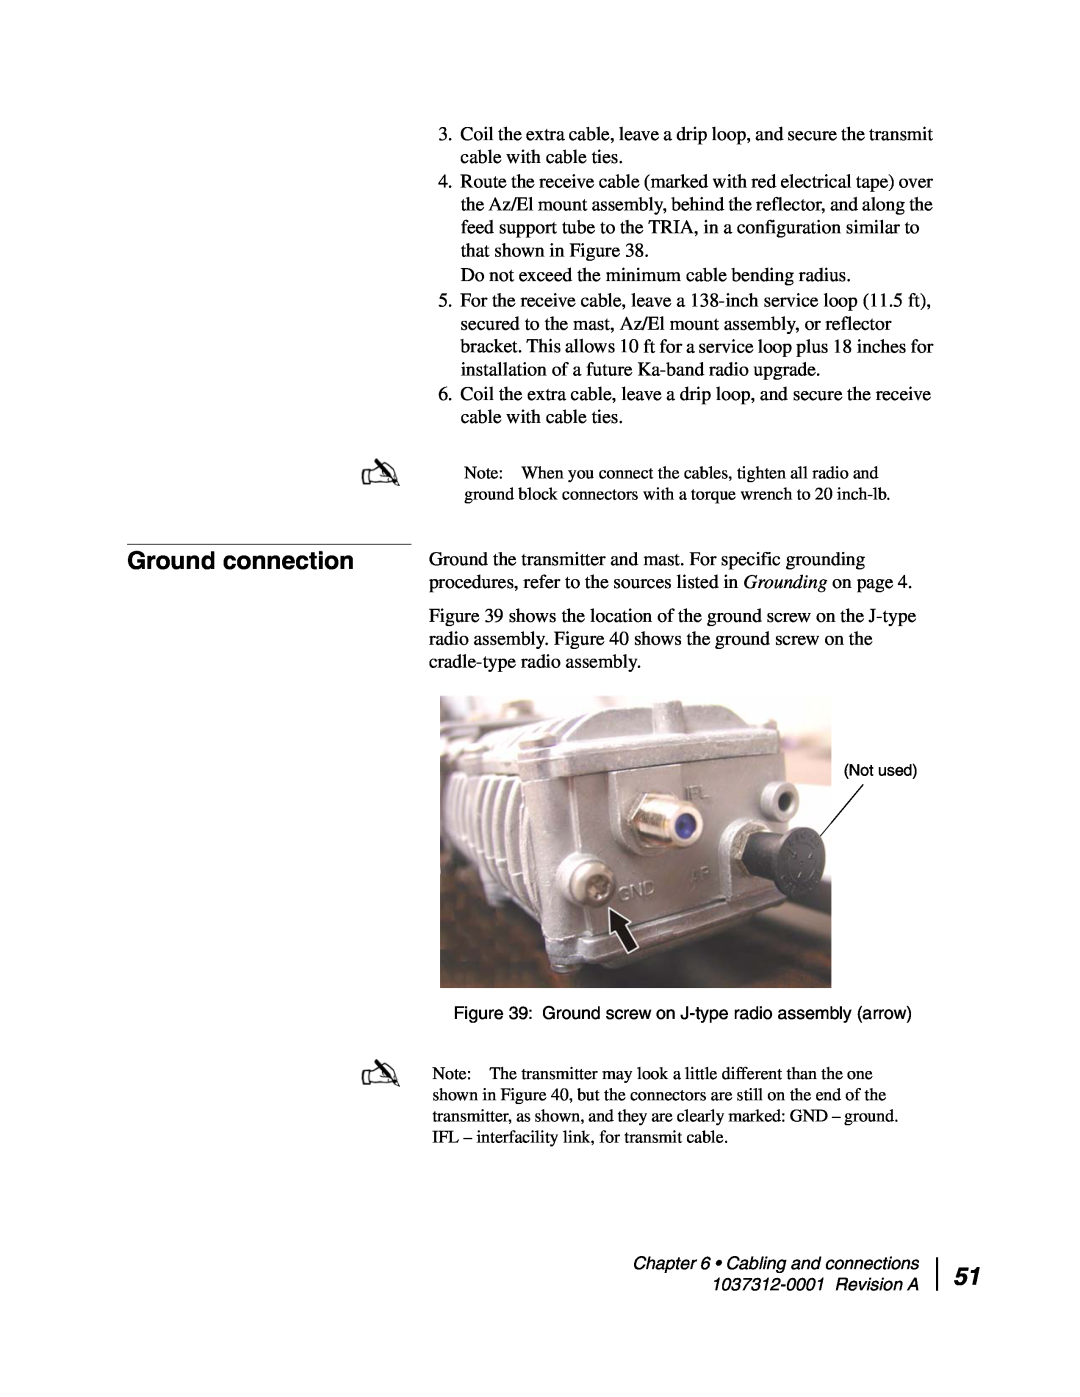 Hughes AN6-098P installation manual Ground connection 